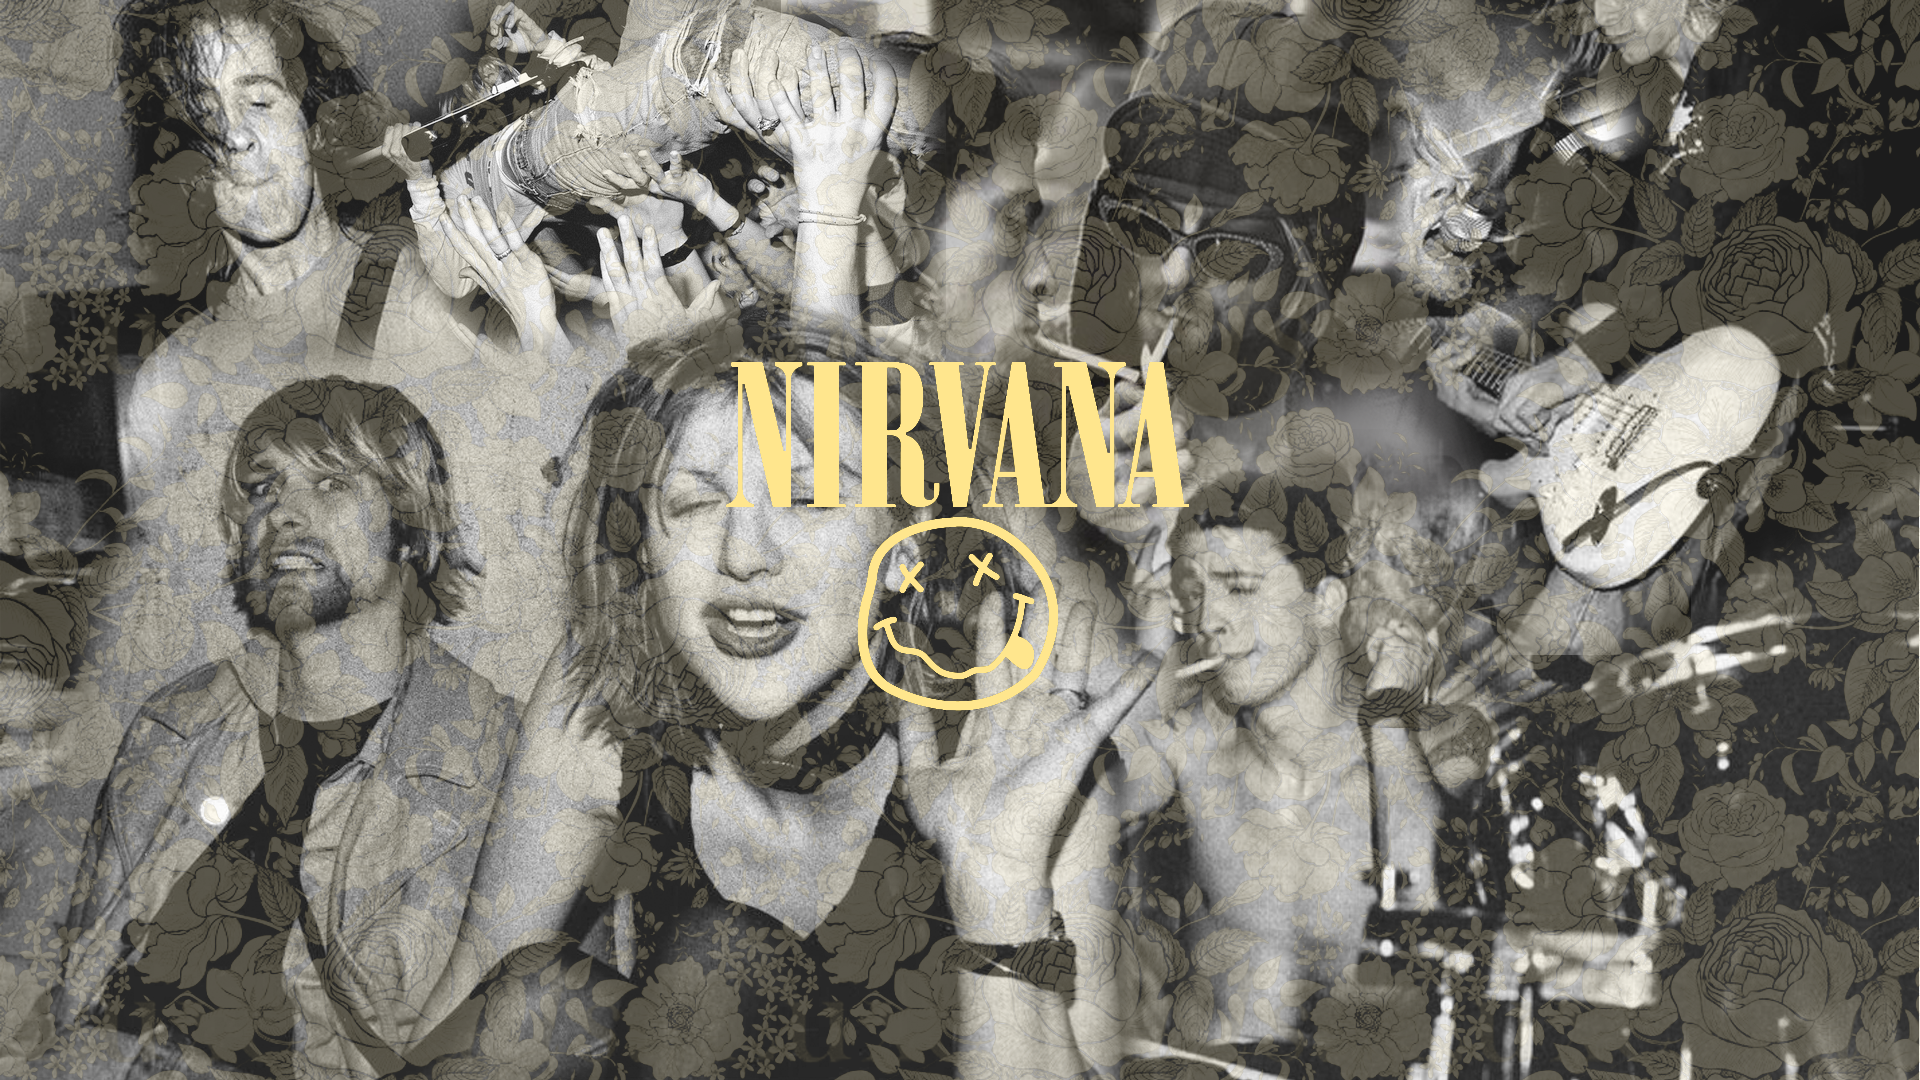 bunch of nirvana wallpaper i made a while ago